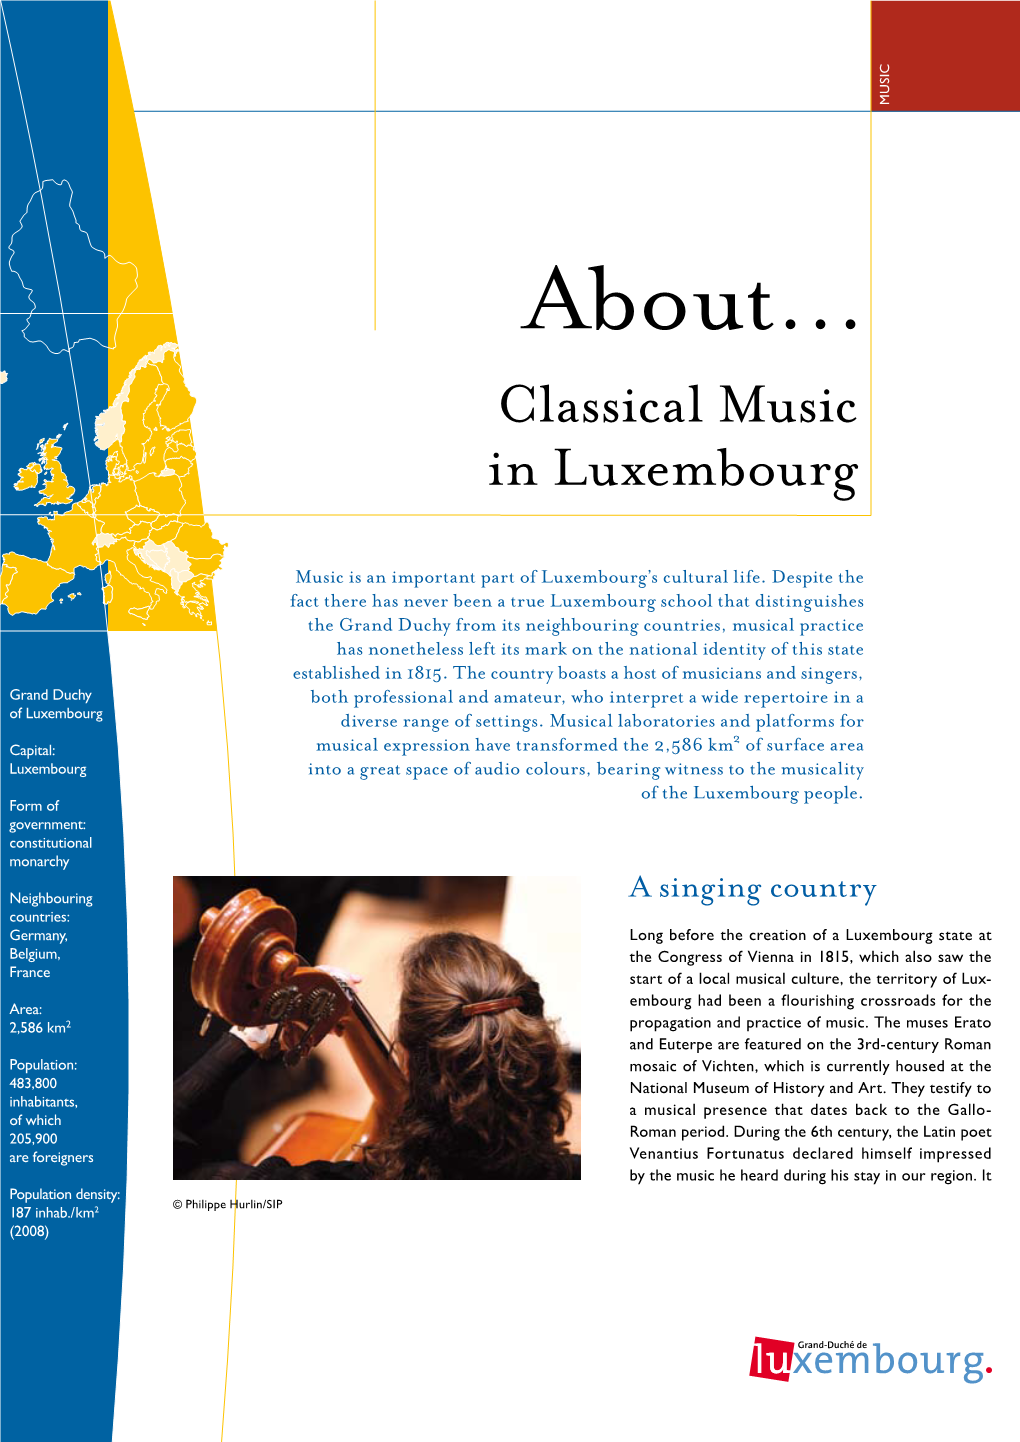 About… Classical Music in Luxembourg